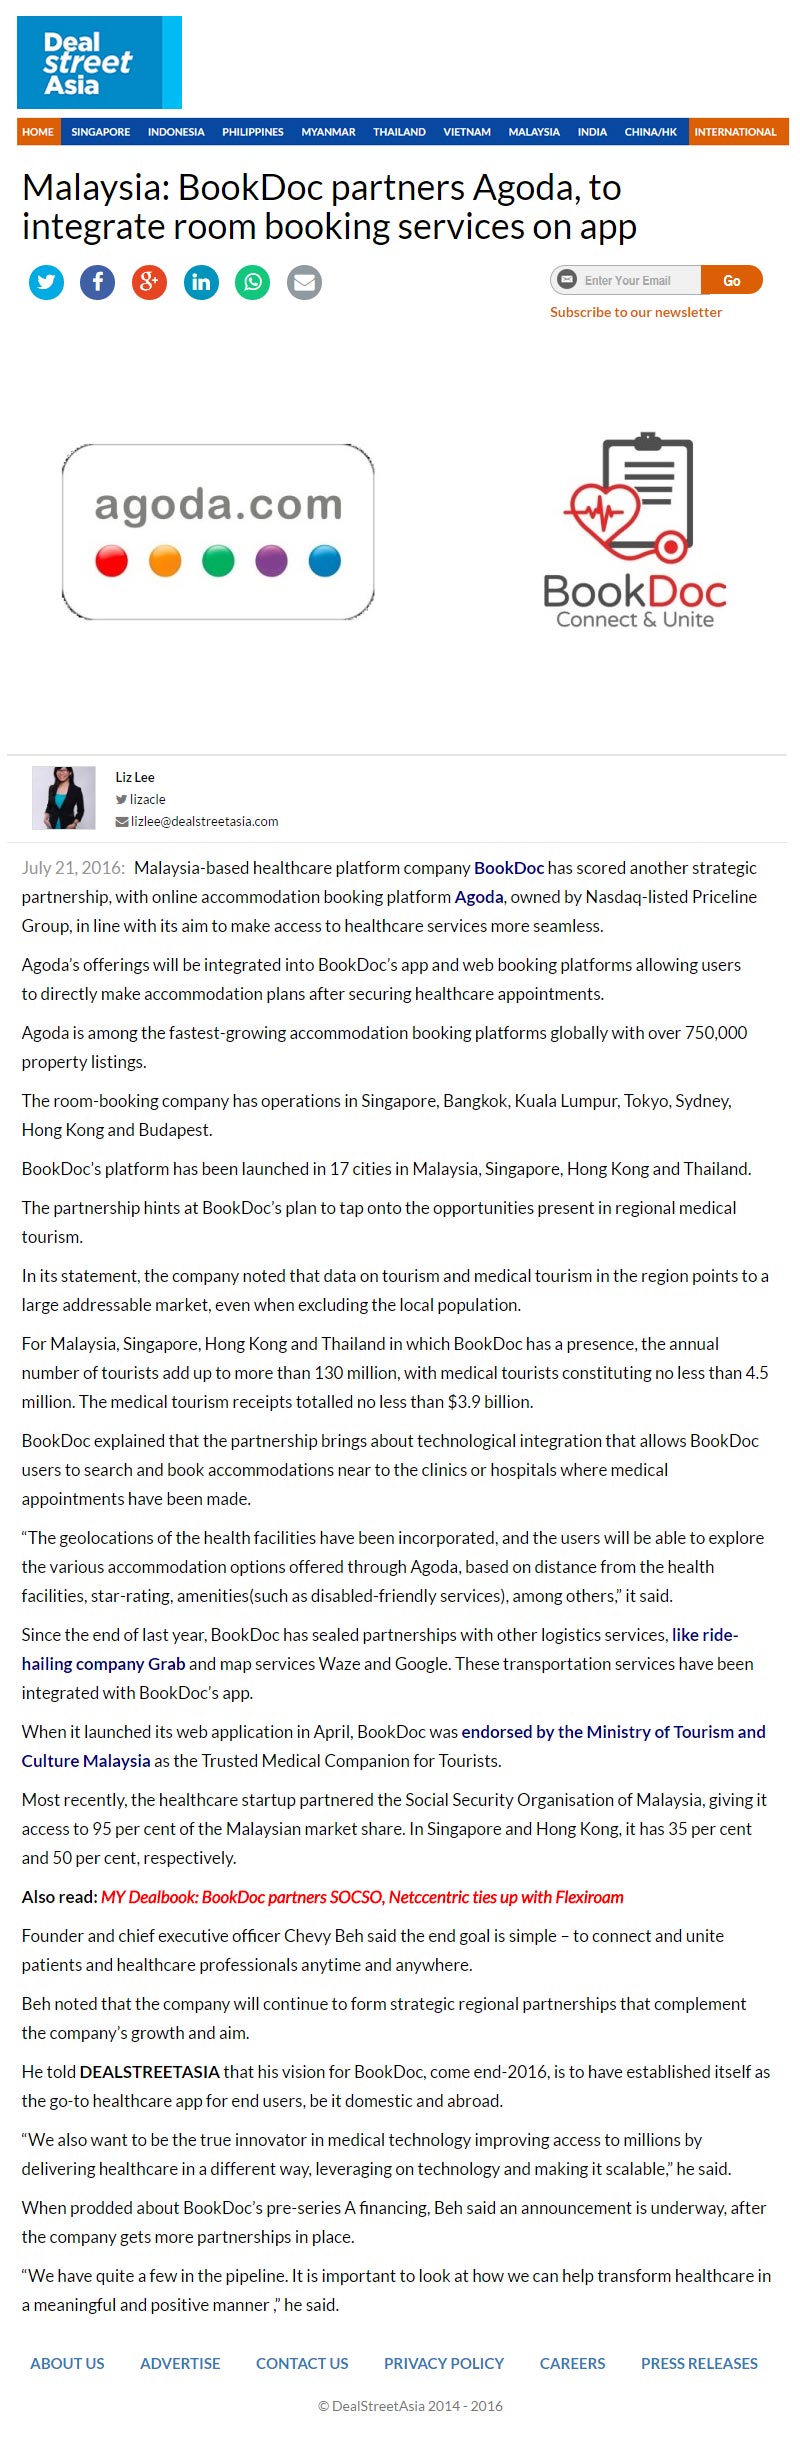 Malaysia: BookDoc partners Agoda, to integrate room booking services on app